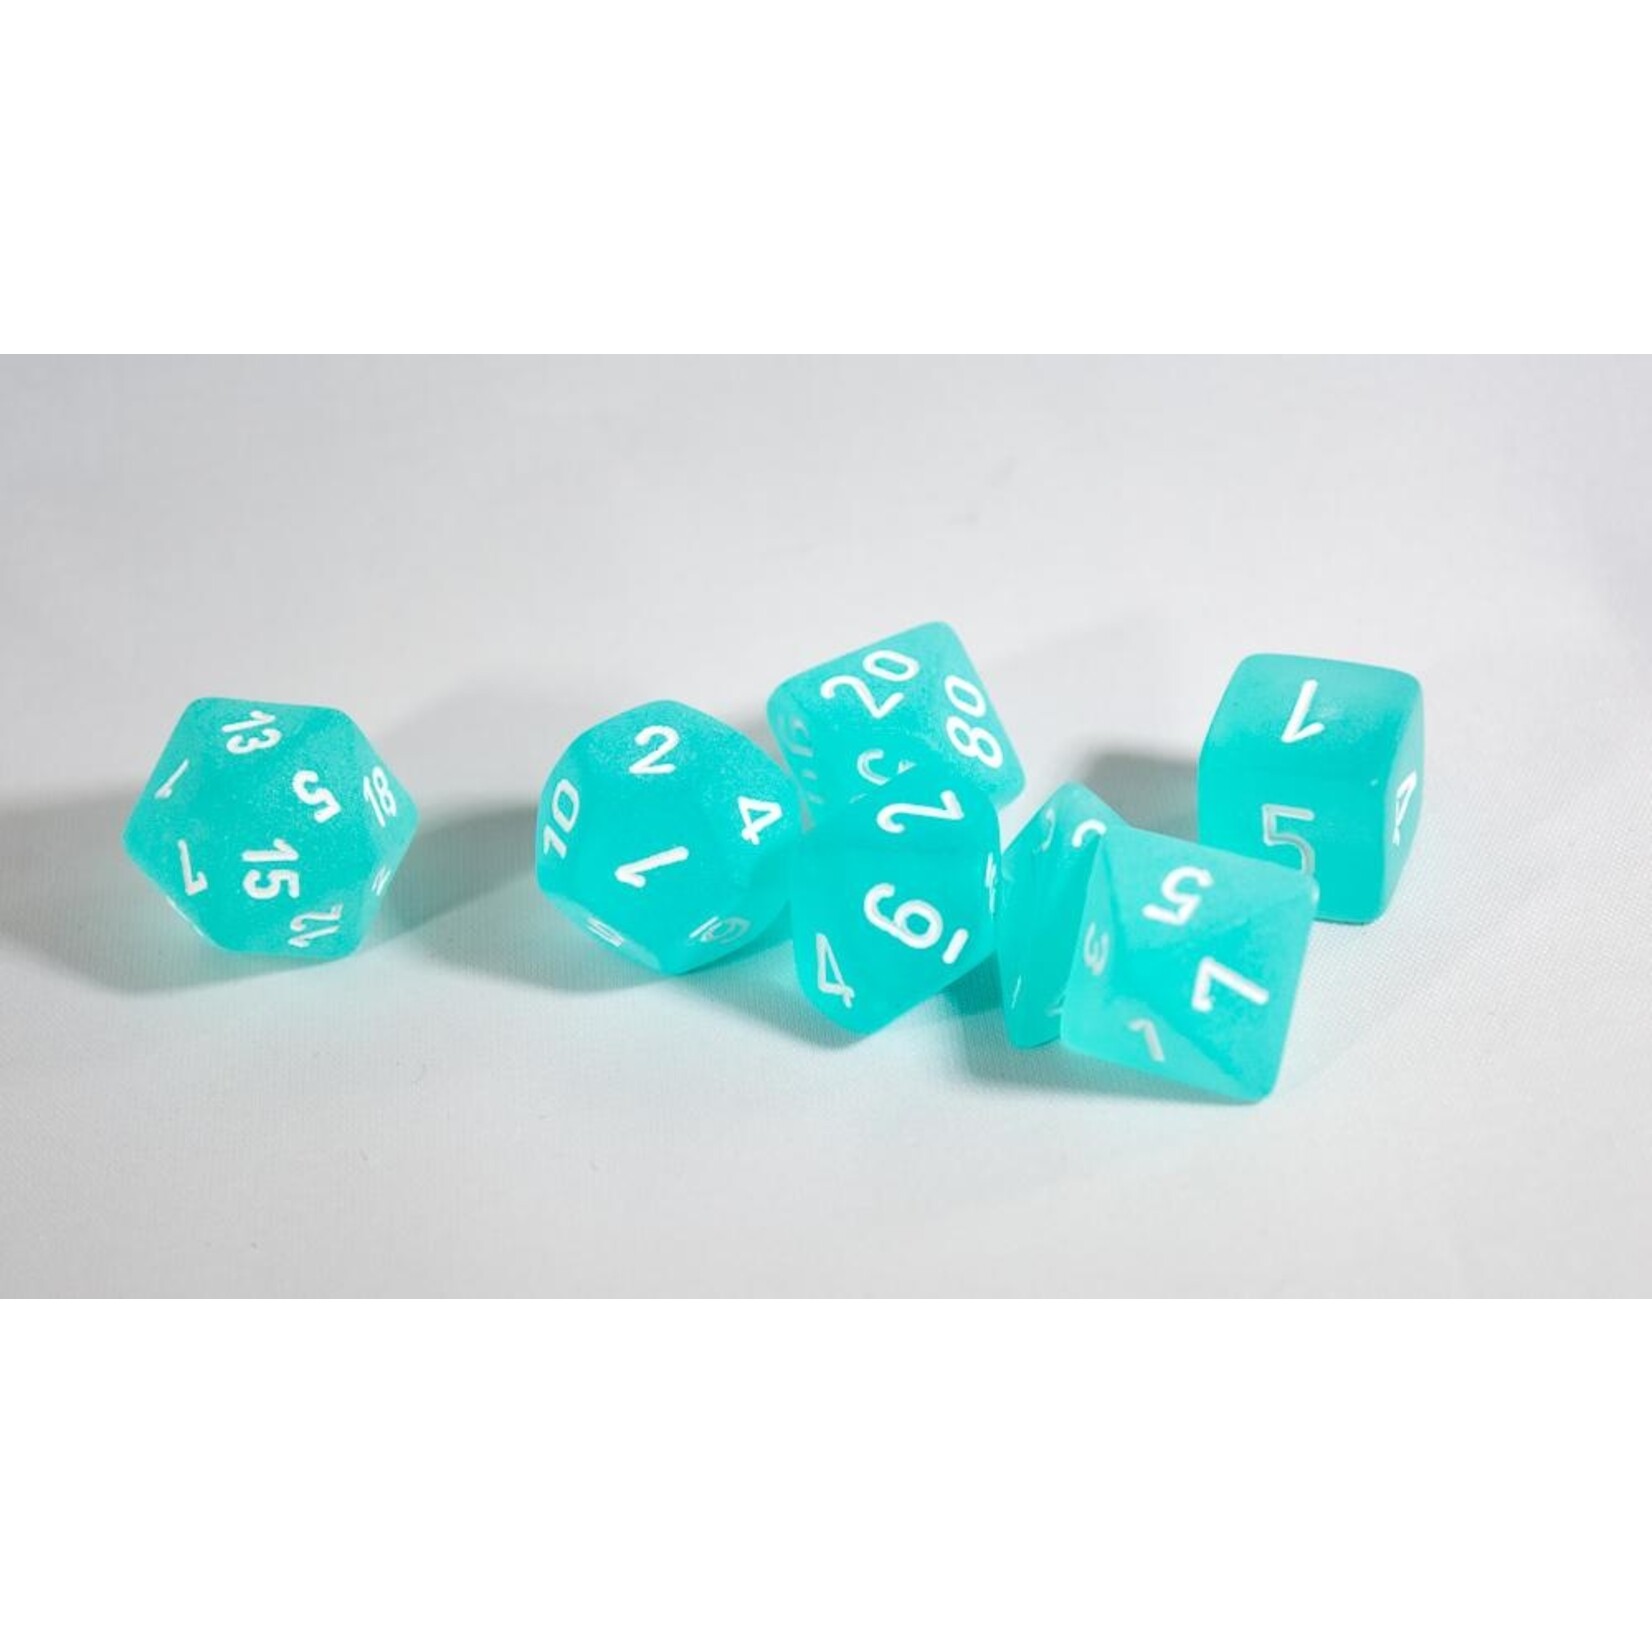 Chessex Chessex 7-Die set Frosted - Teal/White